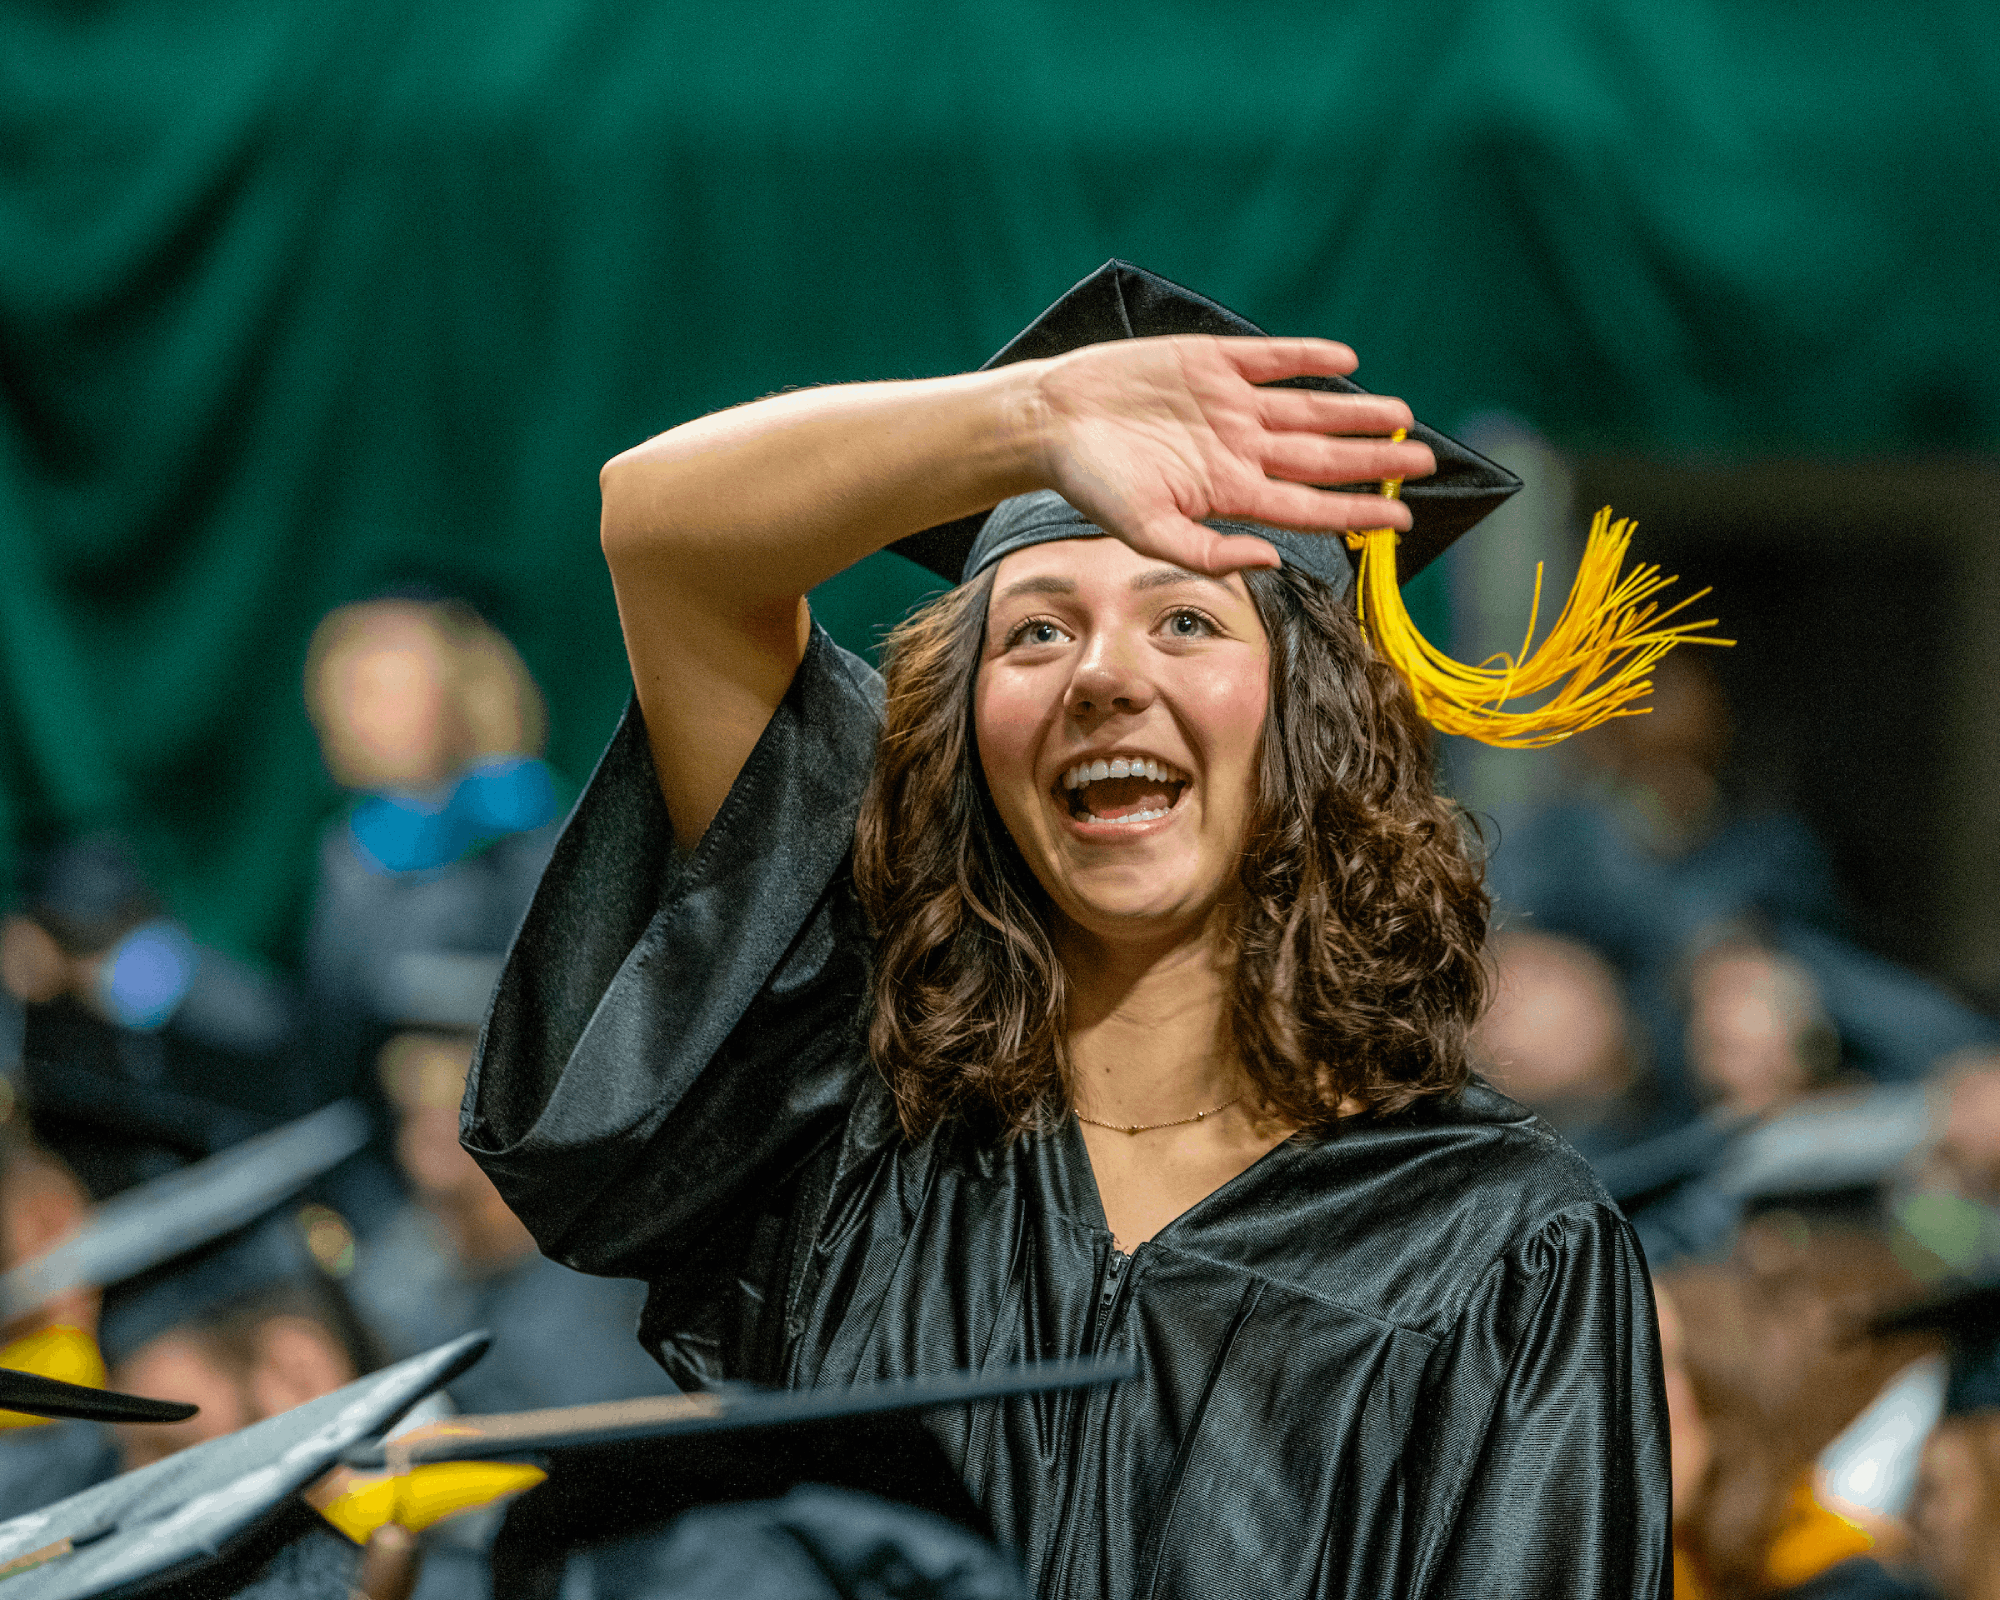 A graduate waves to a supporter at Fall Commencement.